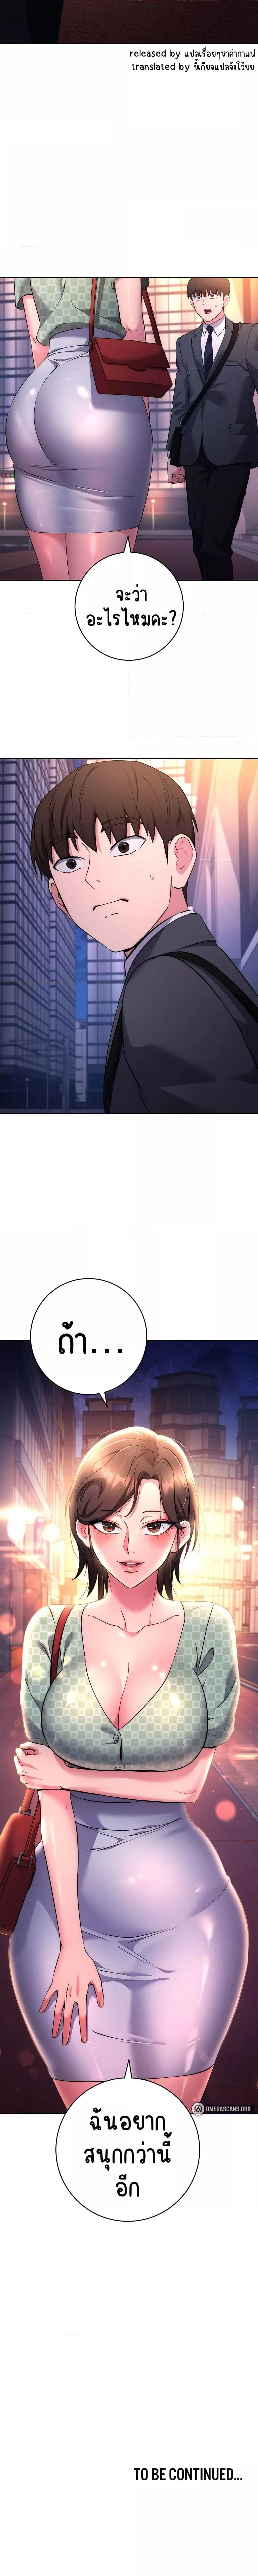 Outsider: The Invisible Man ตอนที่ 7 ภาพ 18